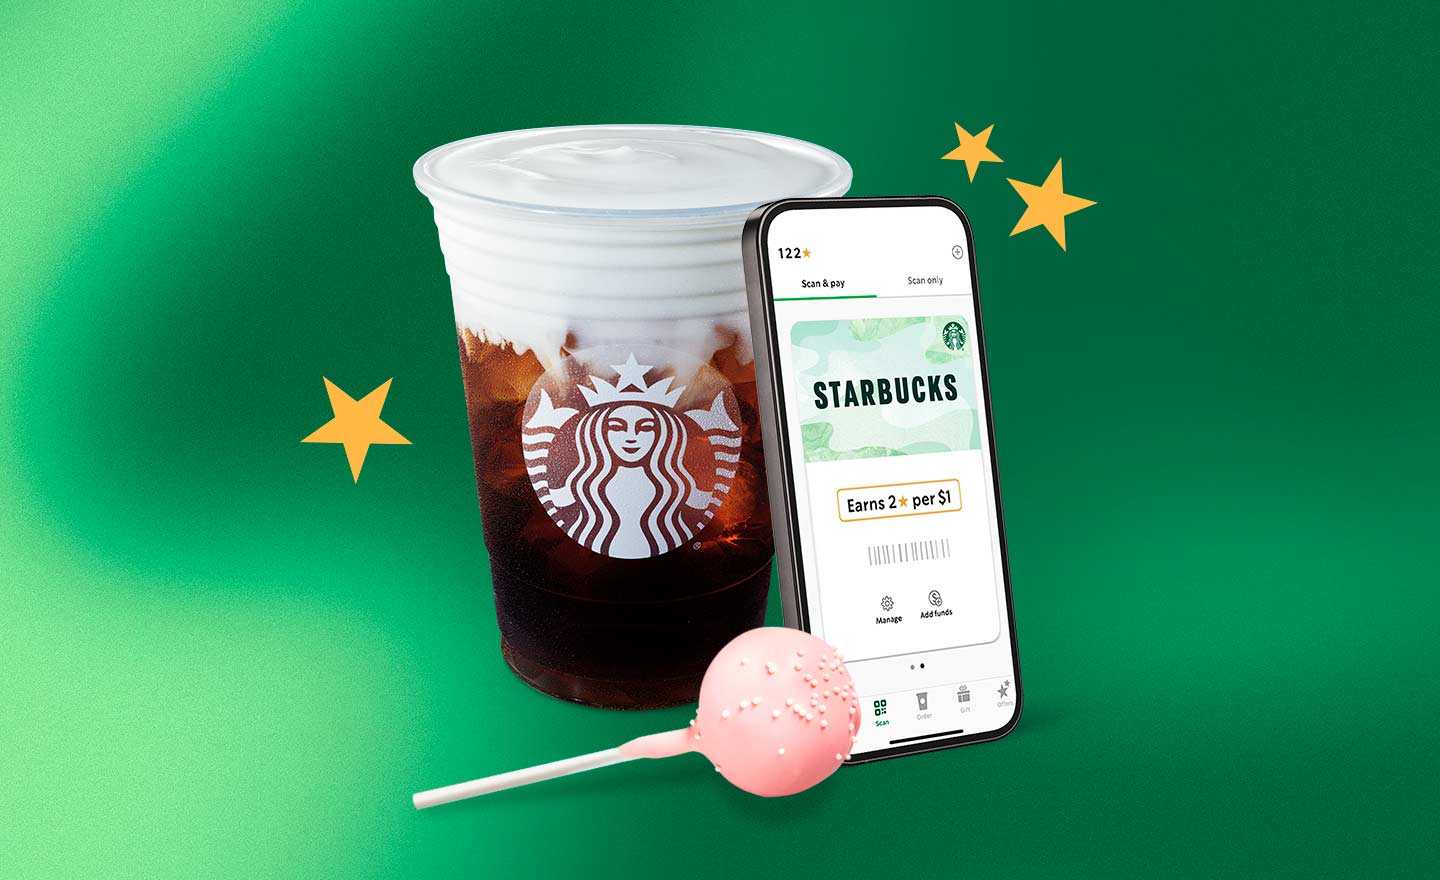 How to Earn Free Stuff at Starbucks